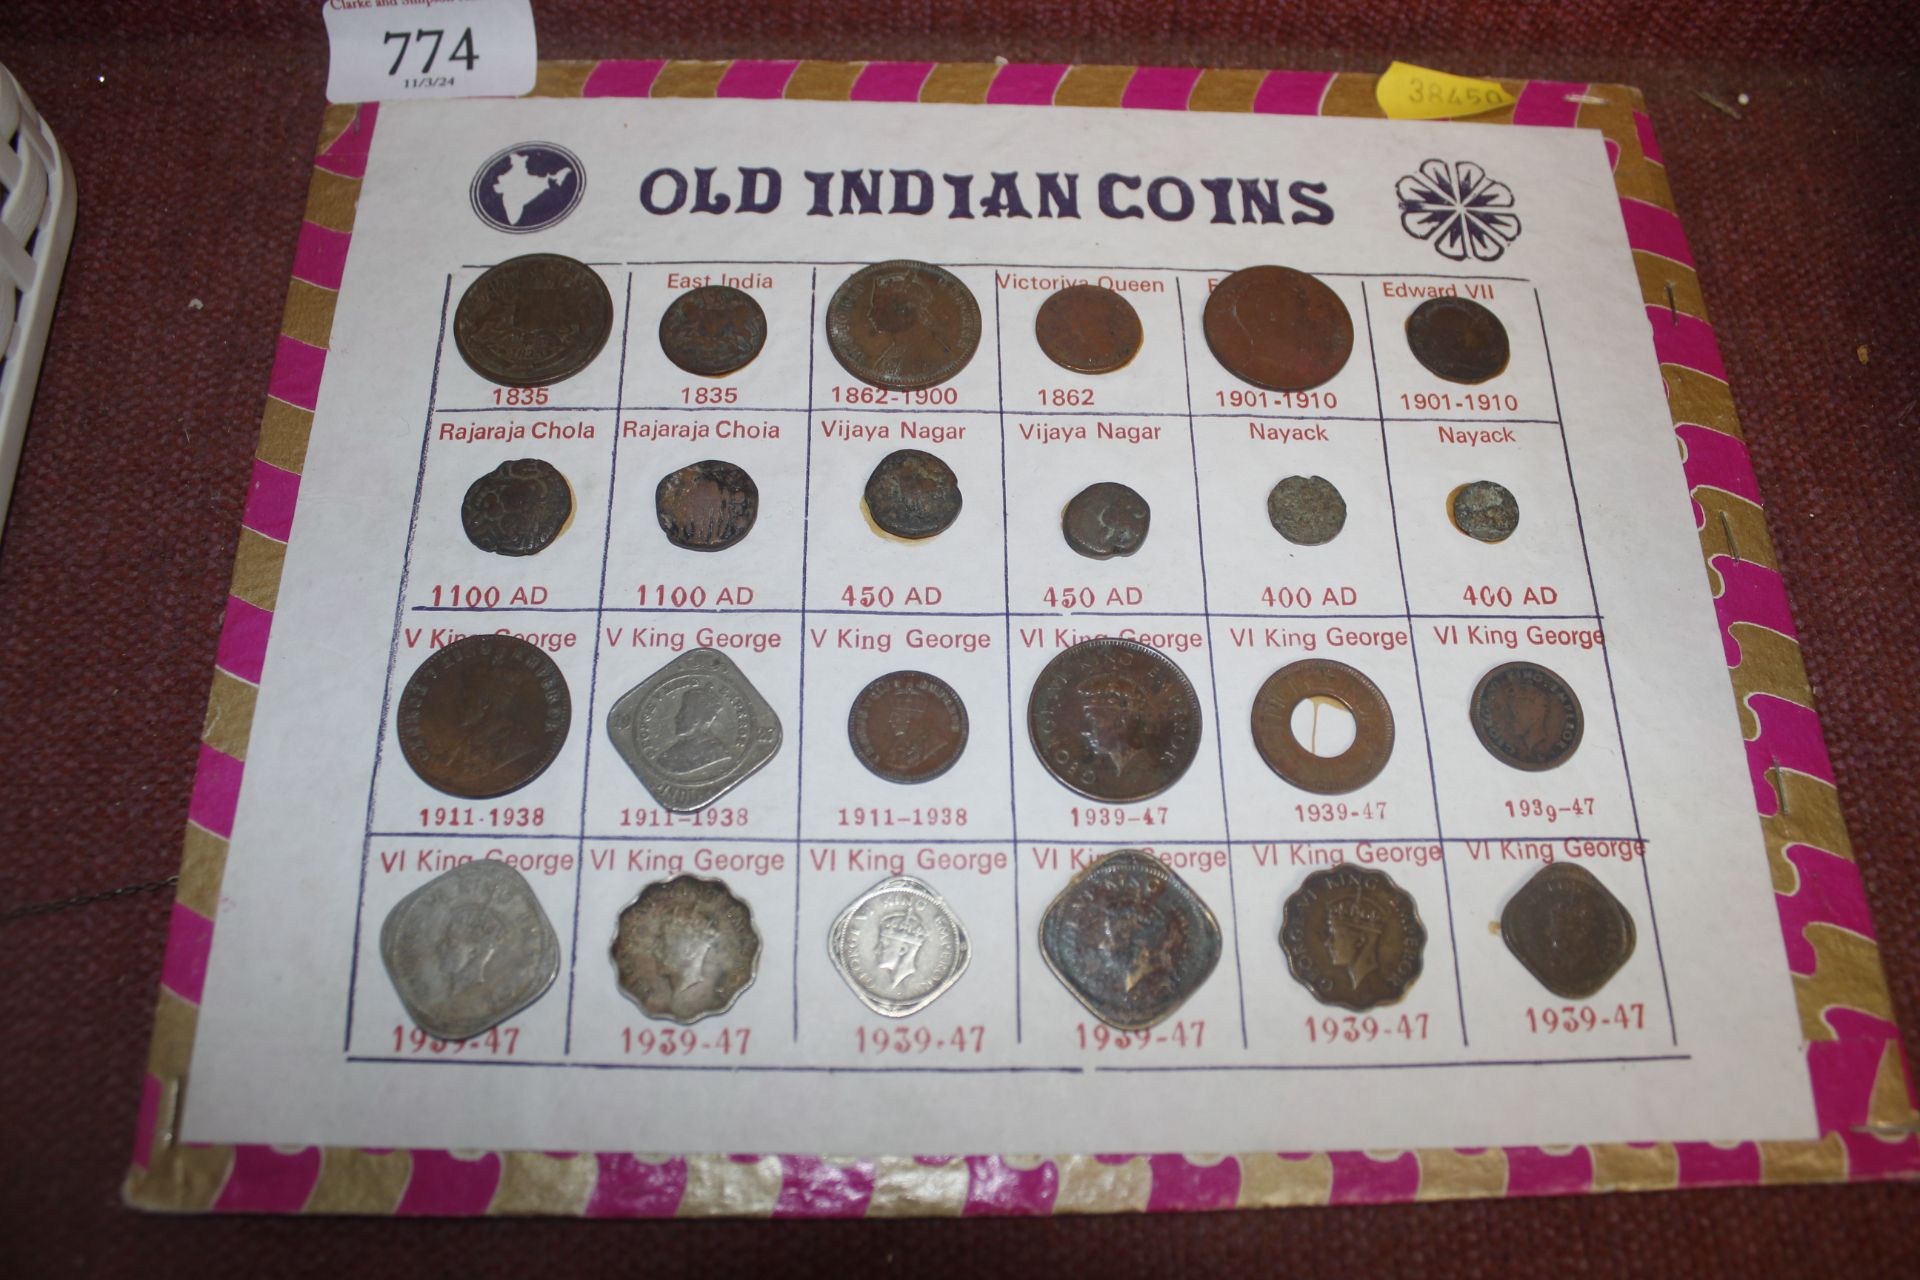 A small collection of old Indian coins on a card